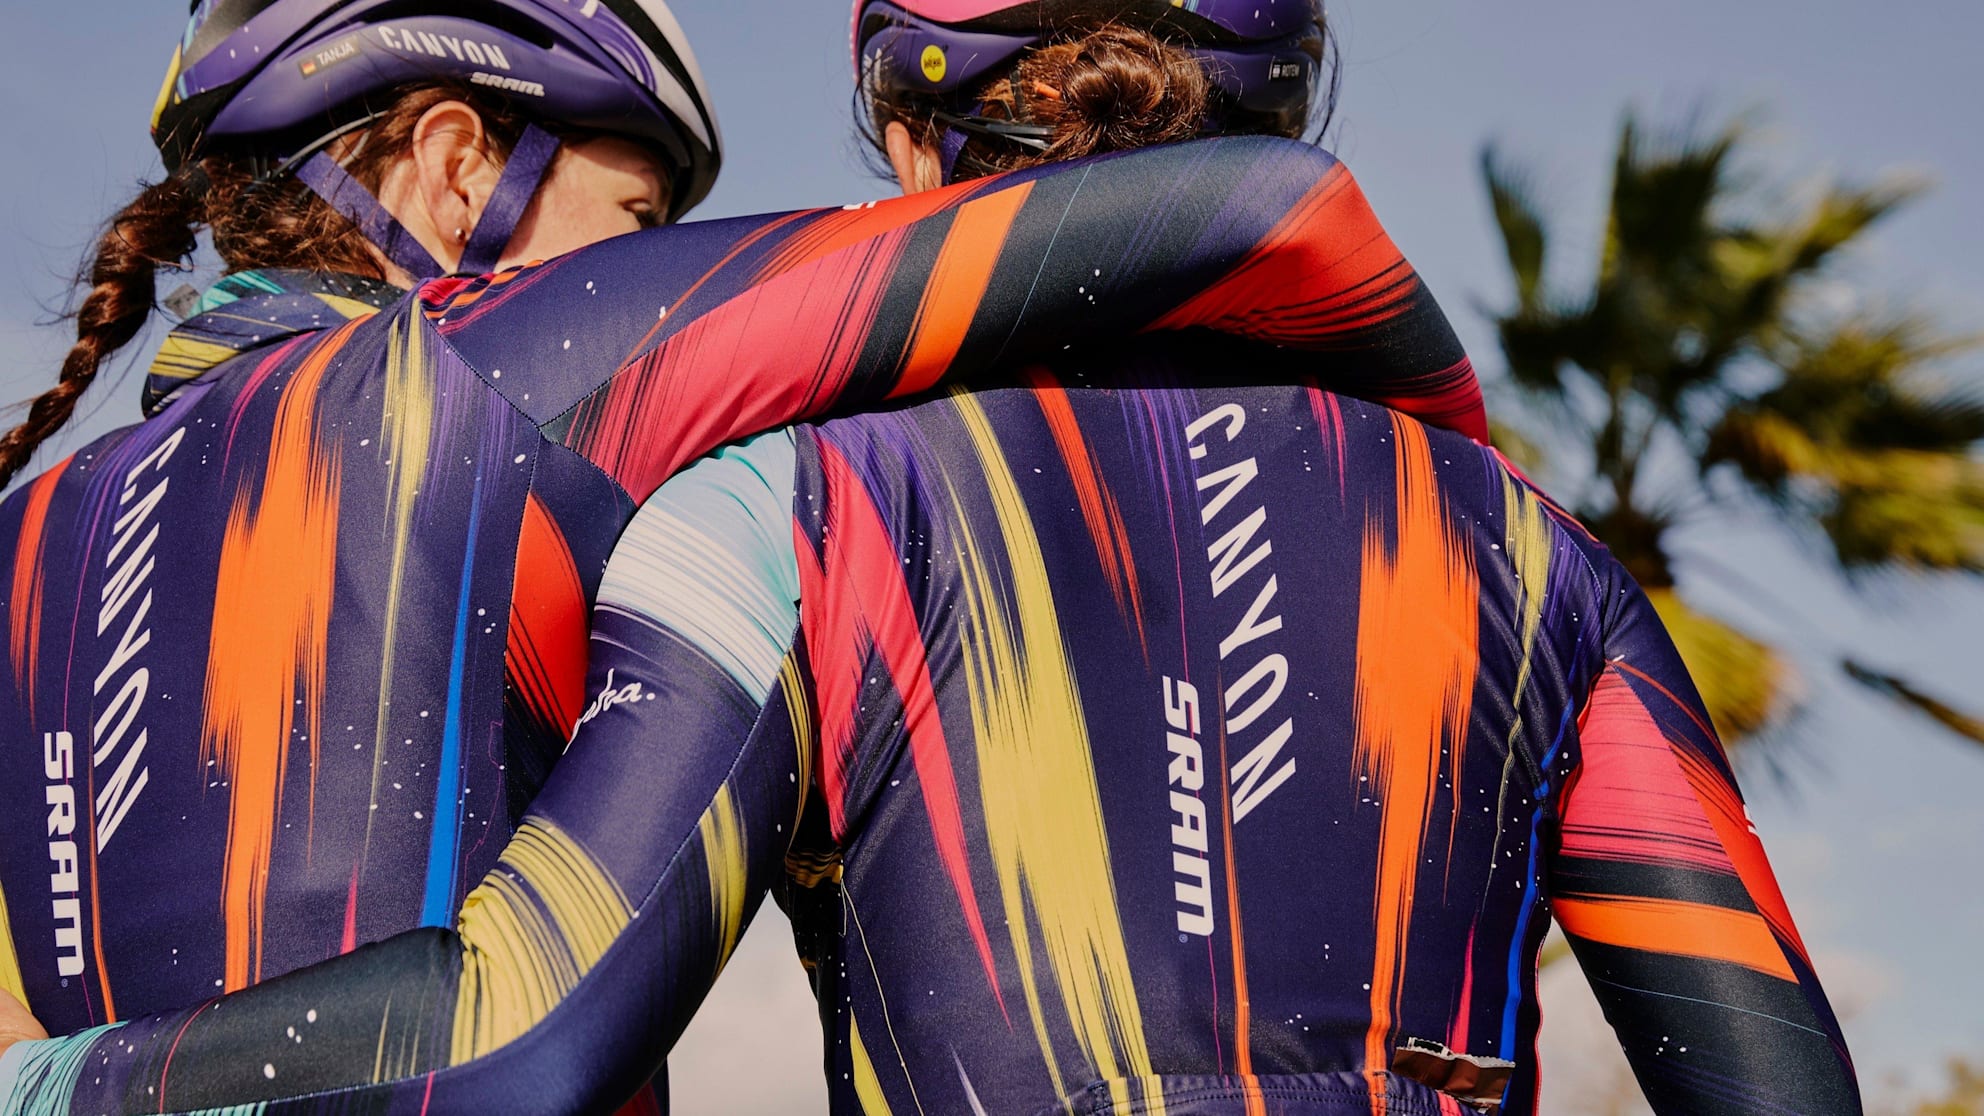 Rapha - Behind the design for the 2020 Canyon//SRAM Pro Team Cycling Kit